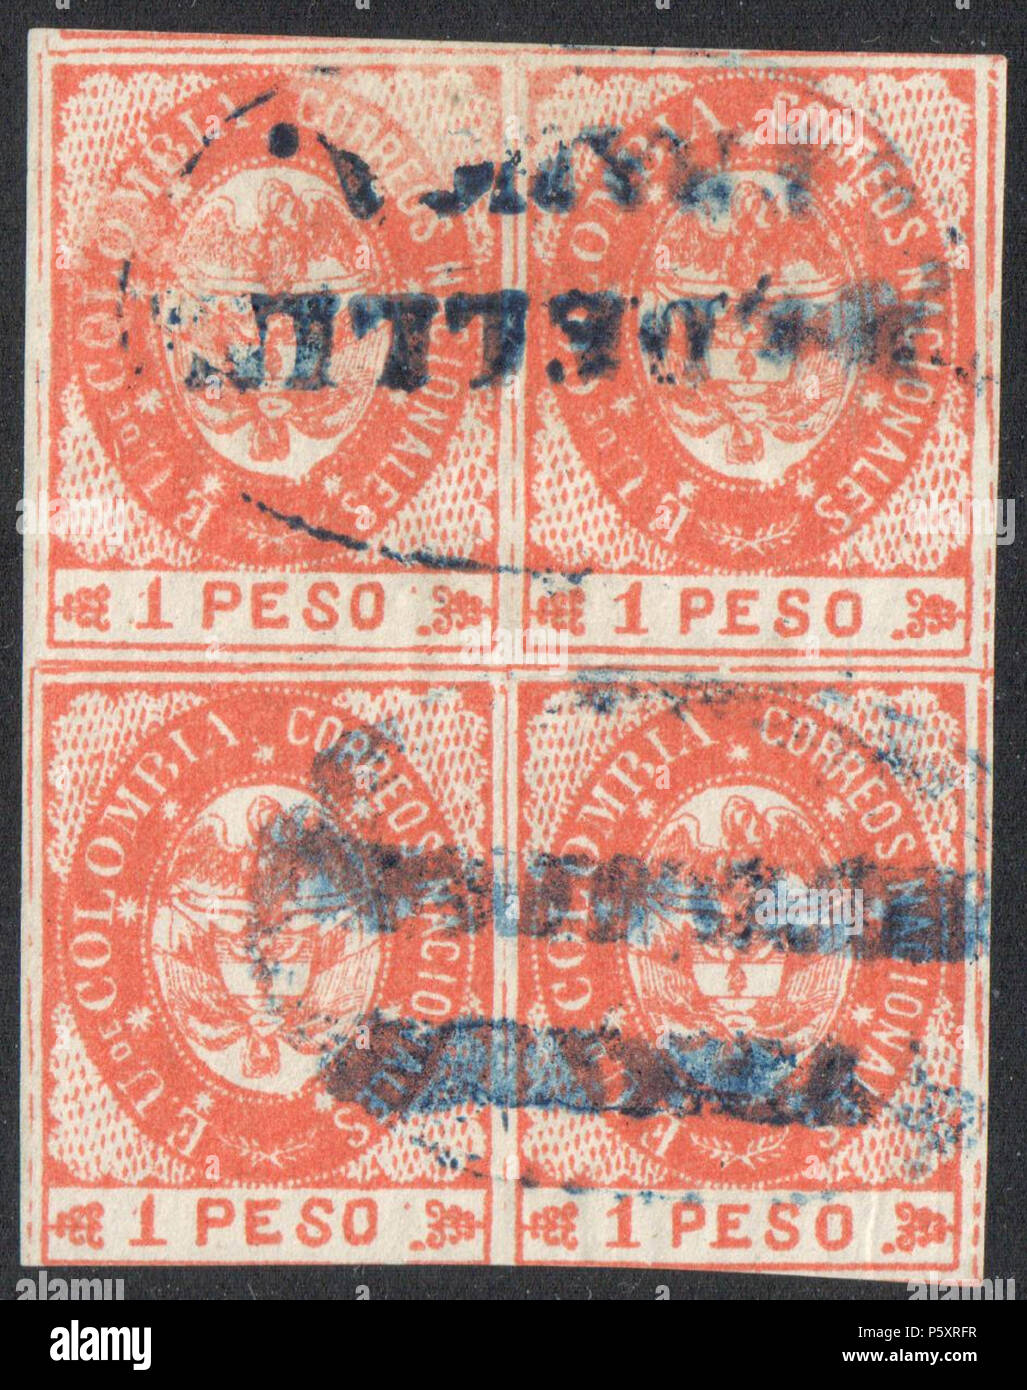 N/A. English: Colombia 1865 1P vermillion block of four, used 'MEDELLÍN FRANCA'. Signed. Catalogue: Sc. 42, Mi. 32a Paper: White wove unwtmk Perforation: imperforated Printing: Lithography Printer: Ayala Medrano Printing Ltd, Bogota . 1865. Colombian government 367 Colombia 1865 Sc42B4 Stock Photo